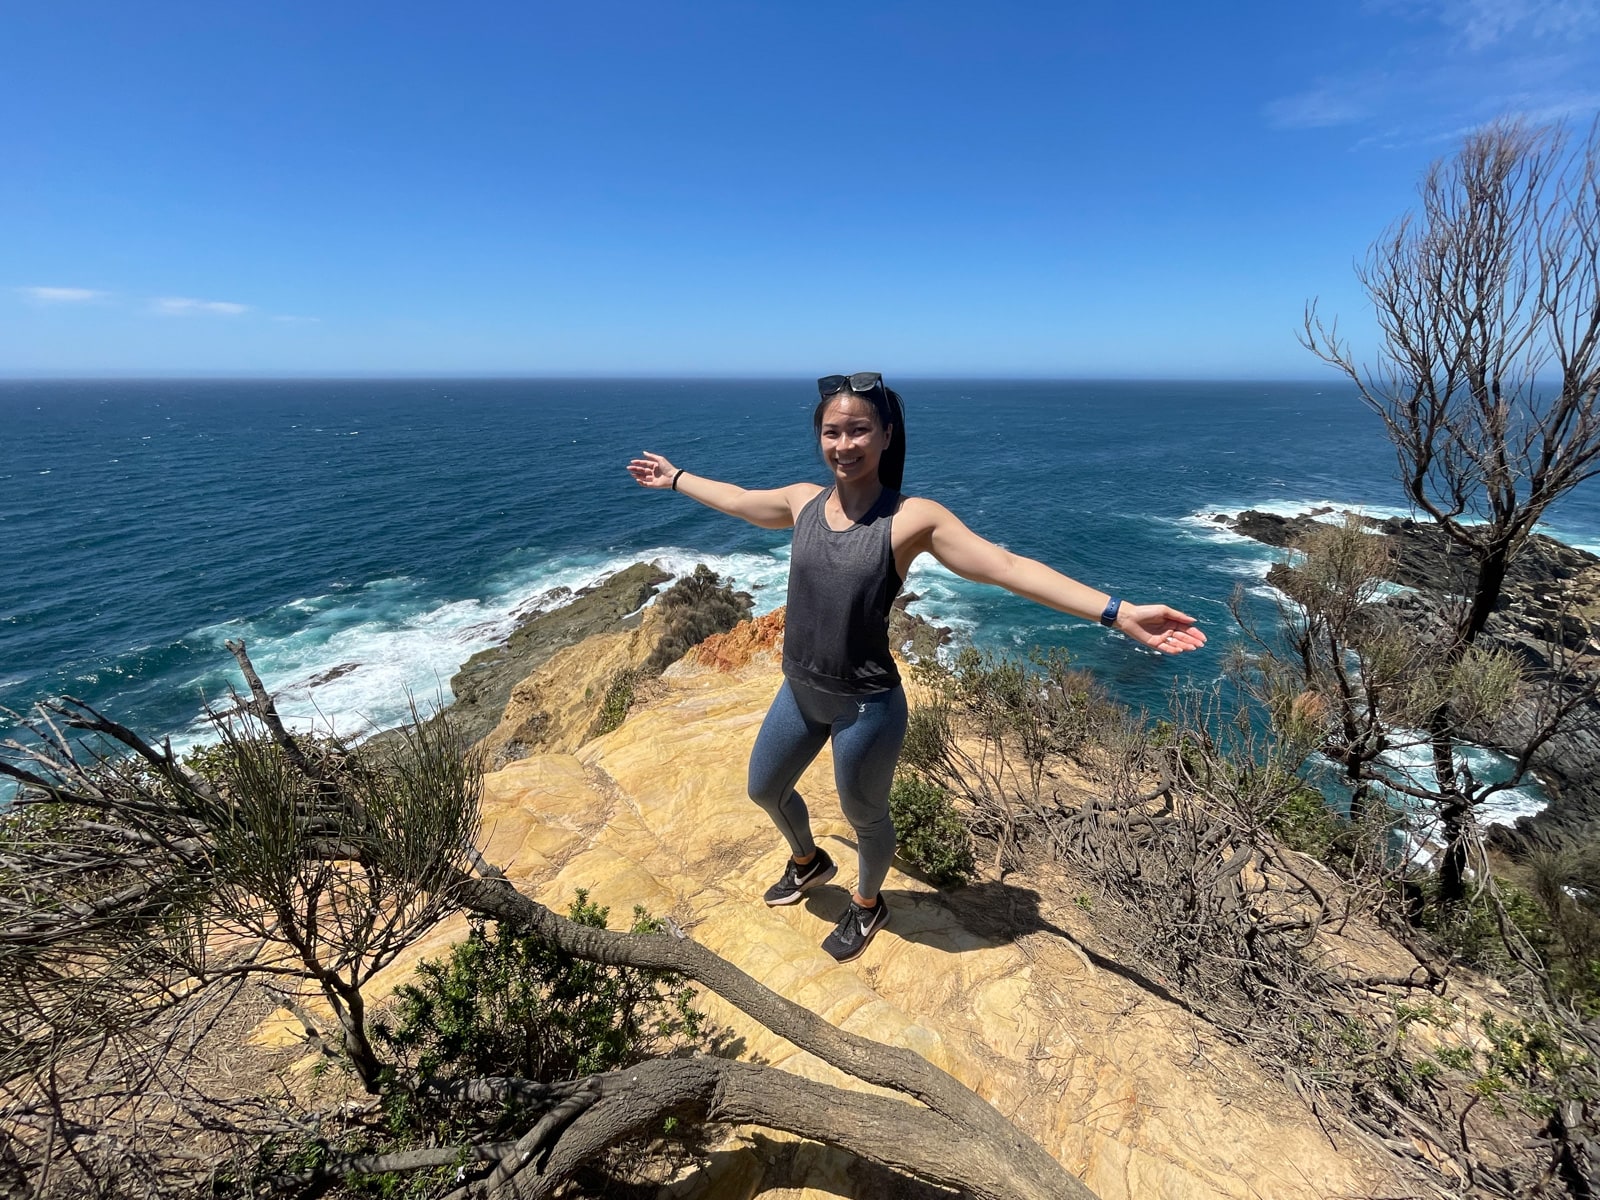 A woman with outstretched arms, dressed in activewear. She is standing on an earthy yellow cliff face and smiling, with a great view of the deep blue ocean behind her. In the foreground, on the cliff, are barren-looking trees with only branches left